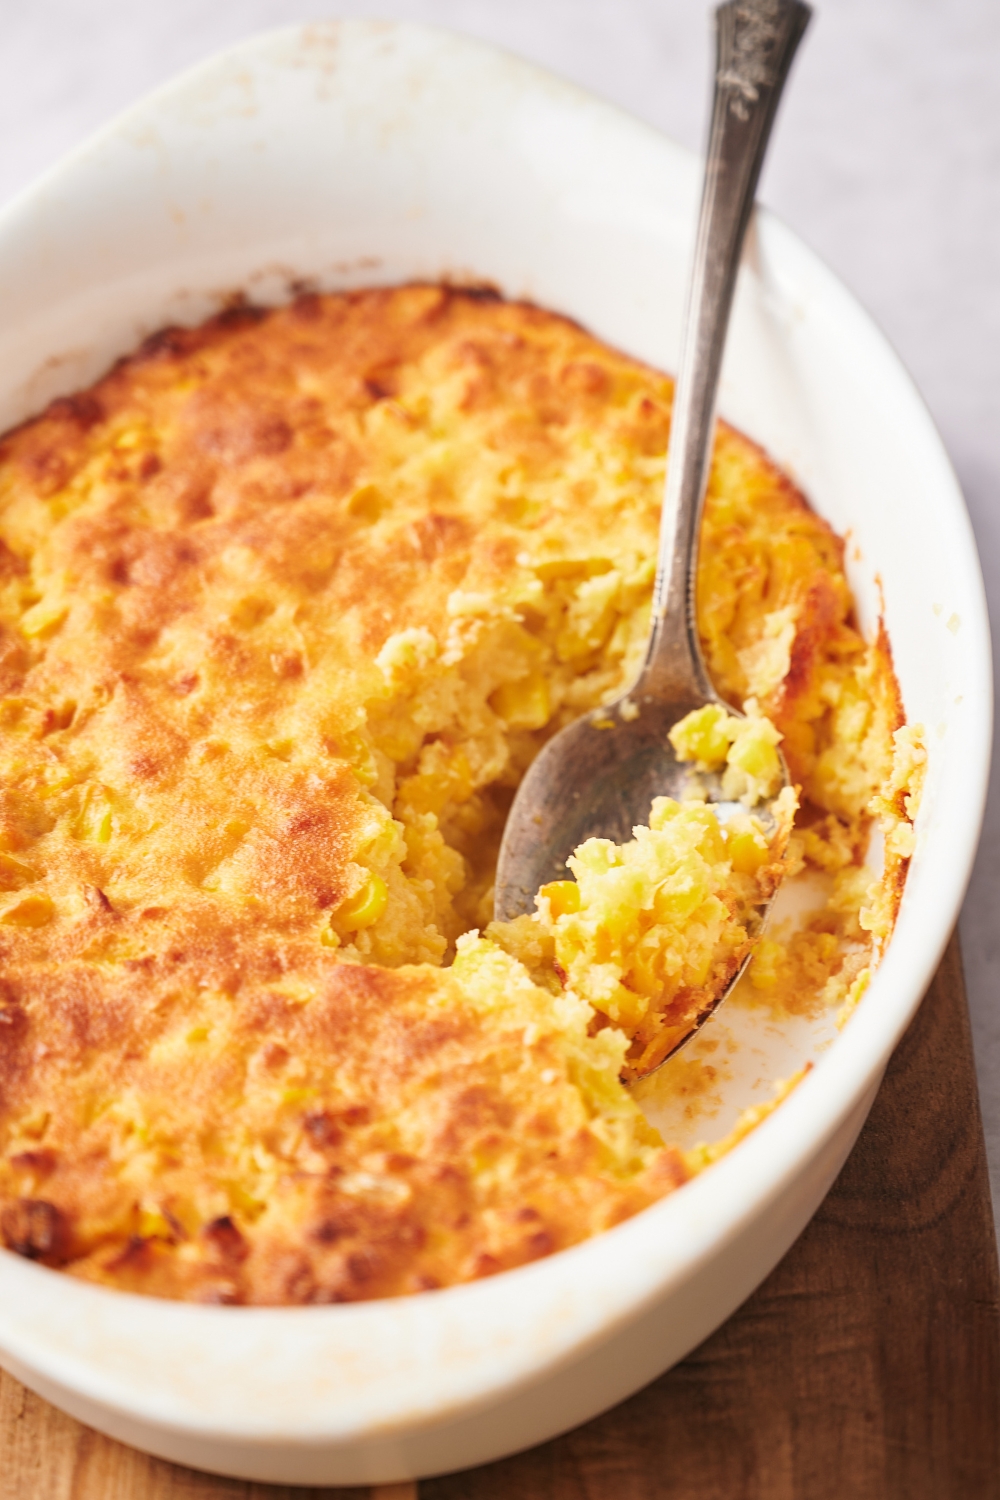 A casserole dish with corn souffle, a spoon is taking a scoop out of it.